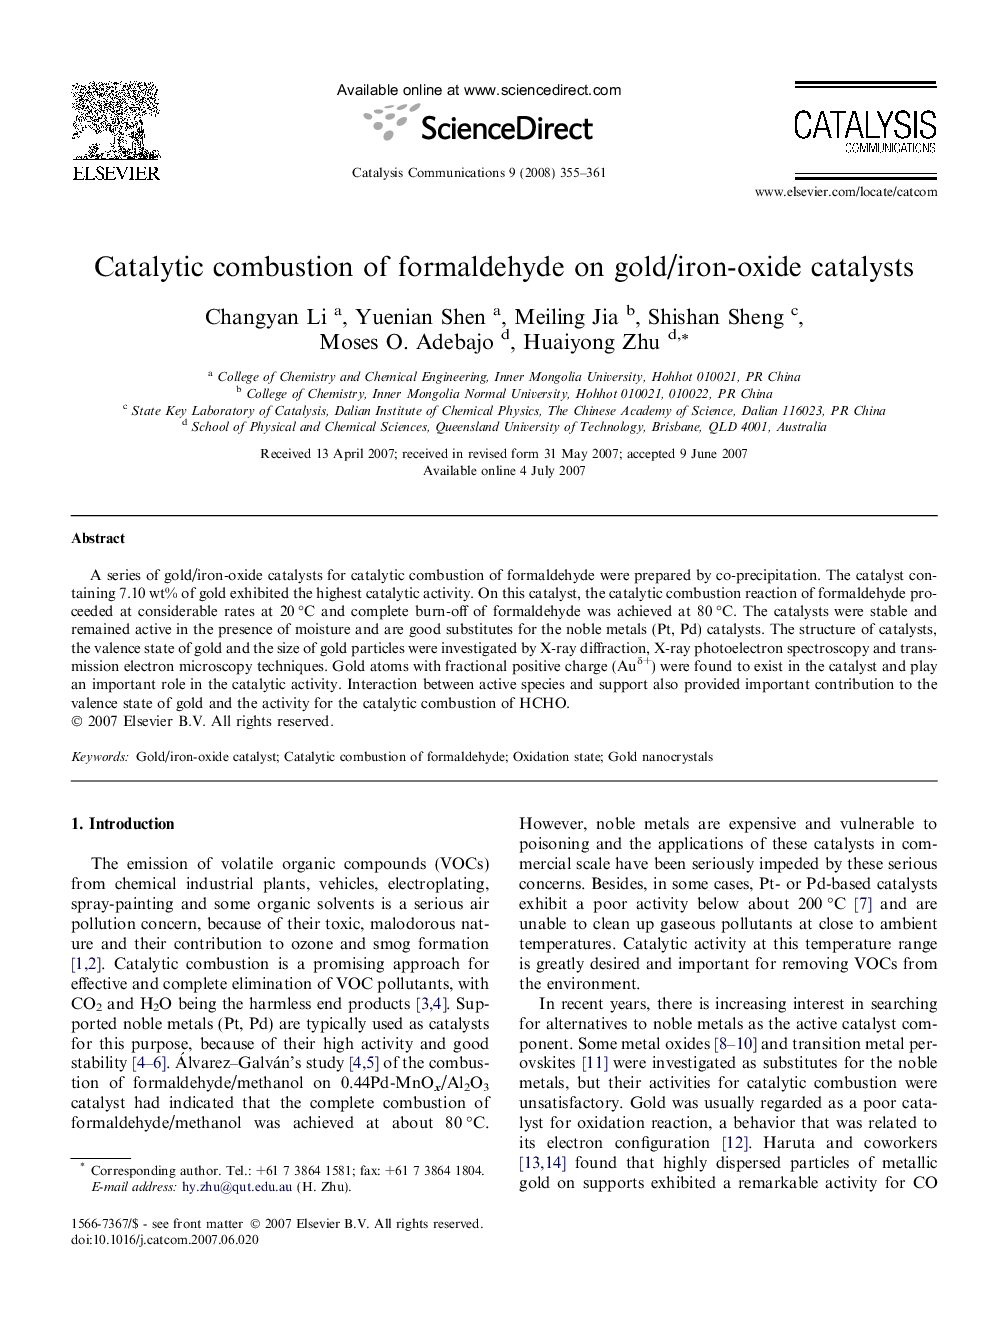 Catalytic combustion of formaldehyde on gold/iron-oxide catalysts